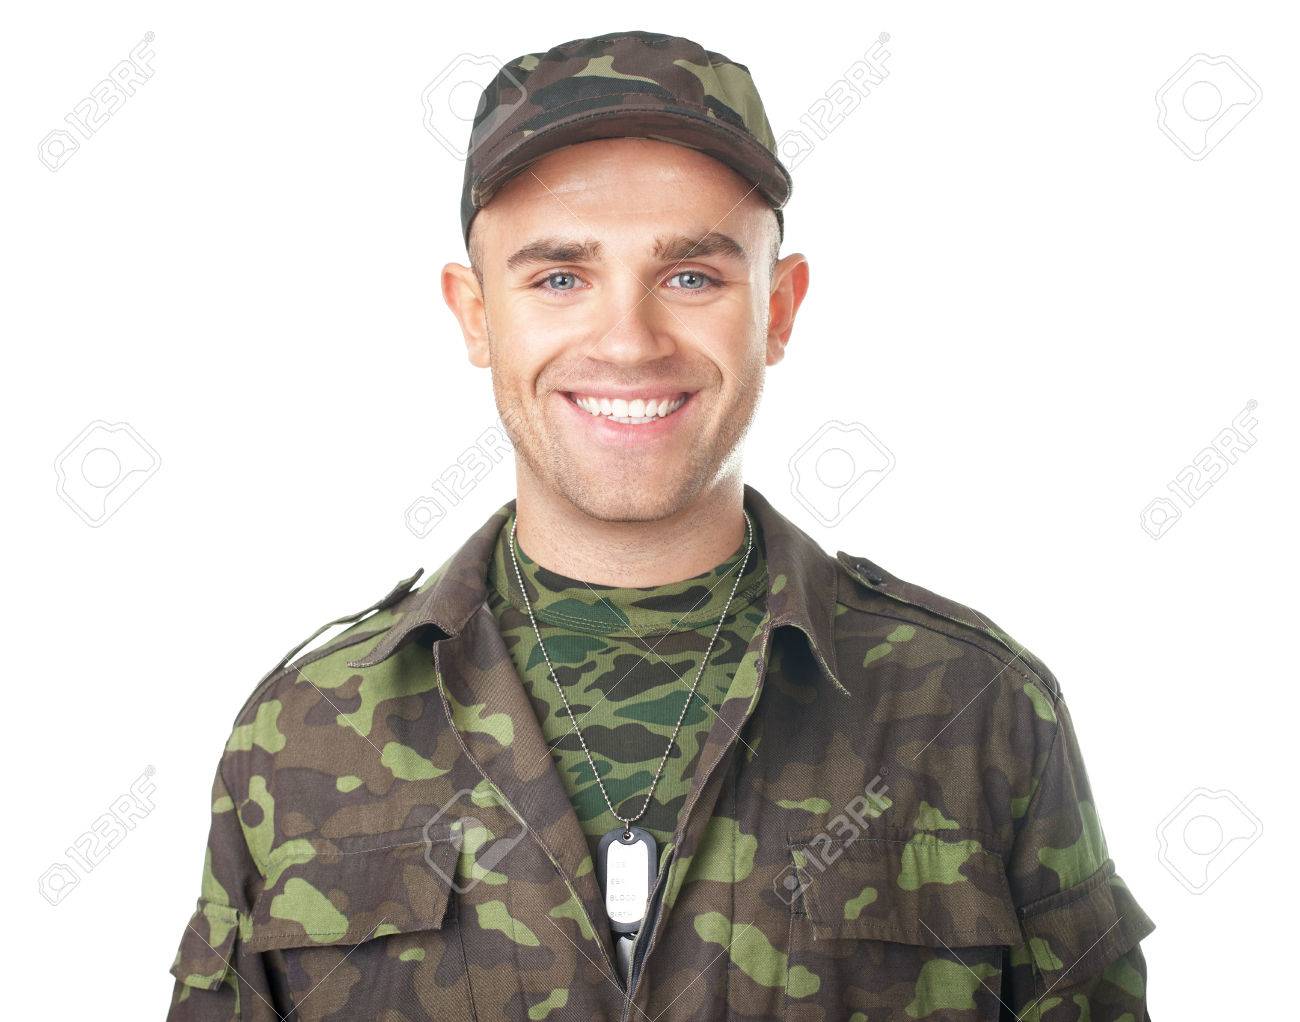 Smiling Army Soldier Isolated On White Background Stock Photo ...